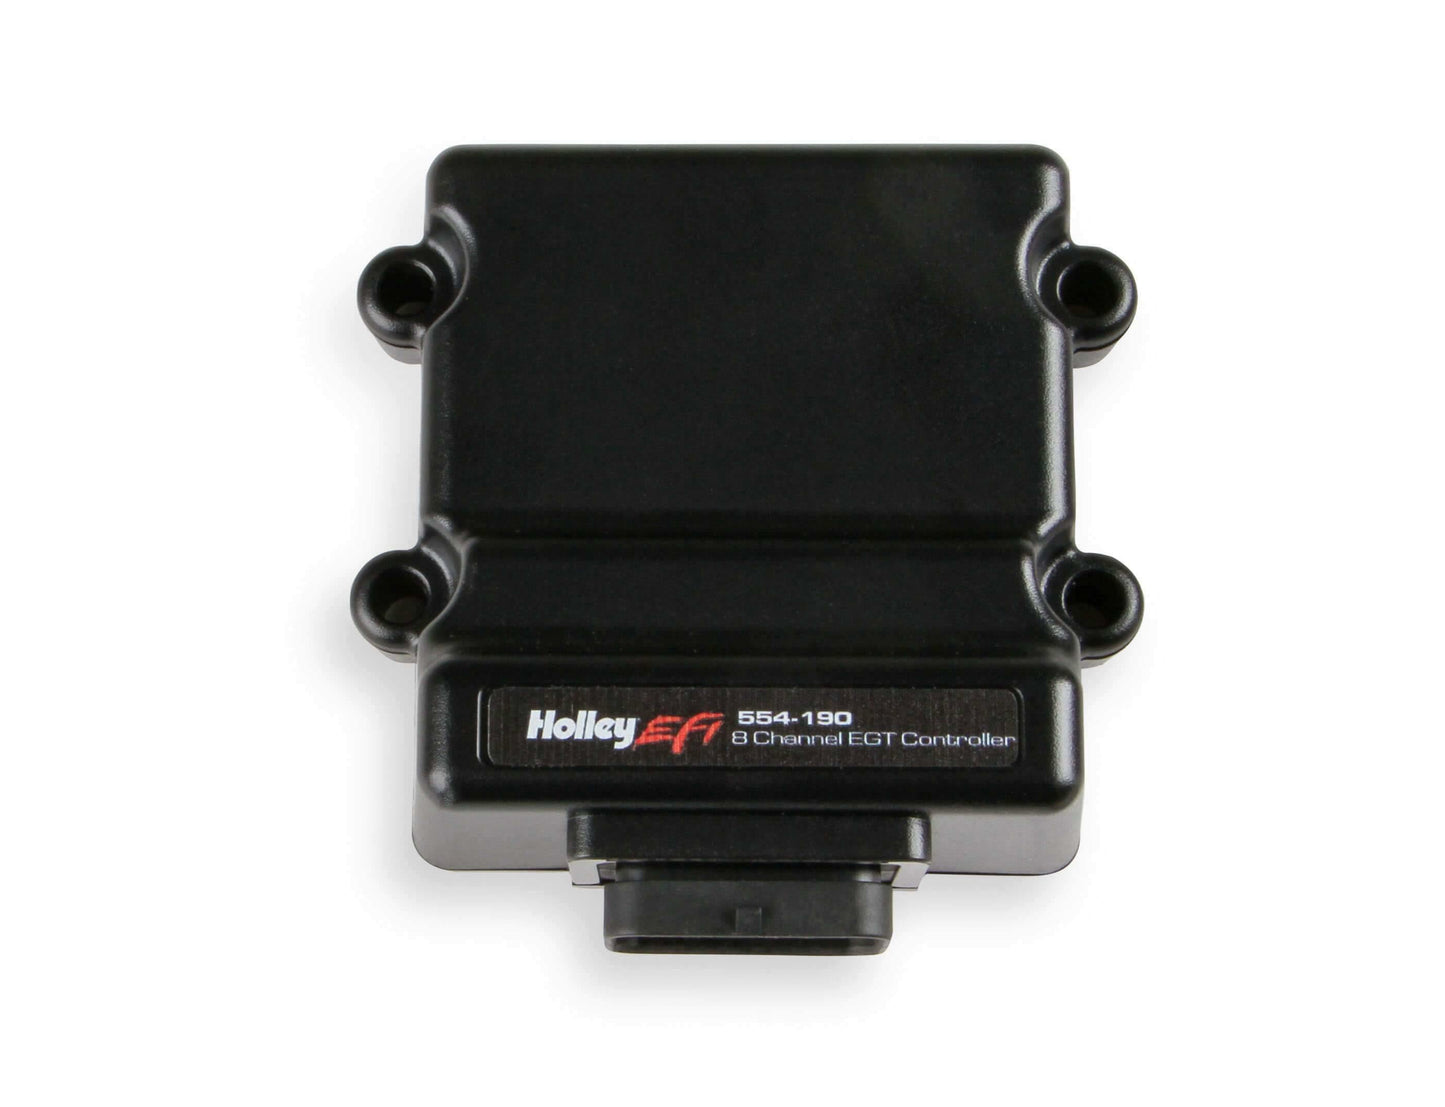 Holley EFI 8 Channel CAN EGT Controller - 554-190